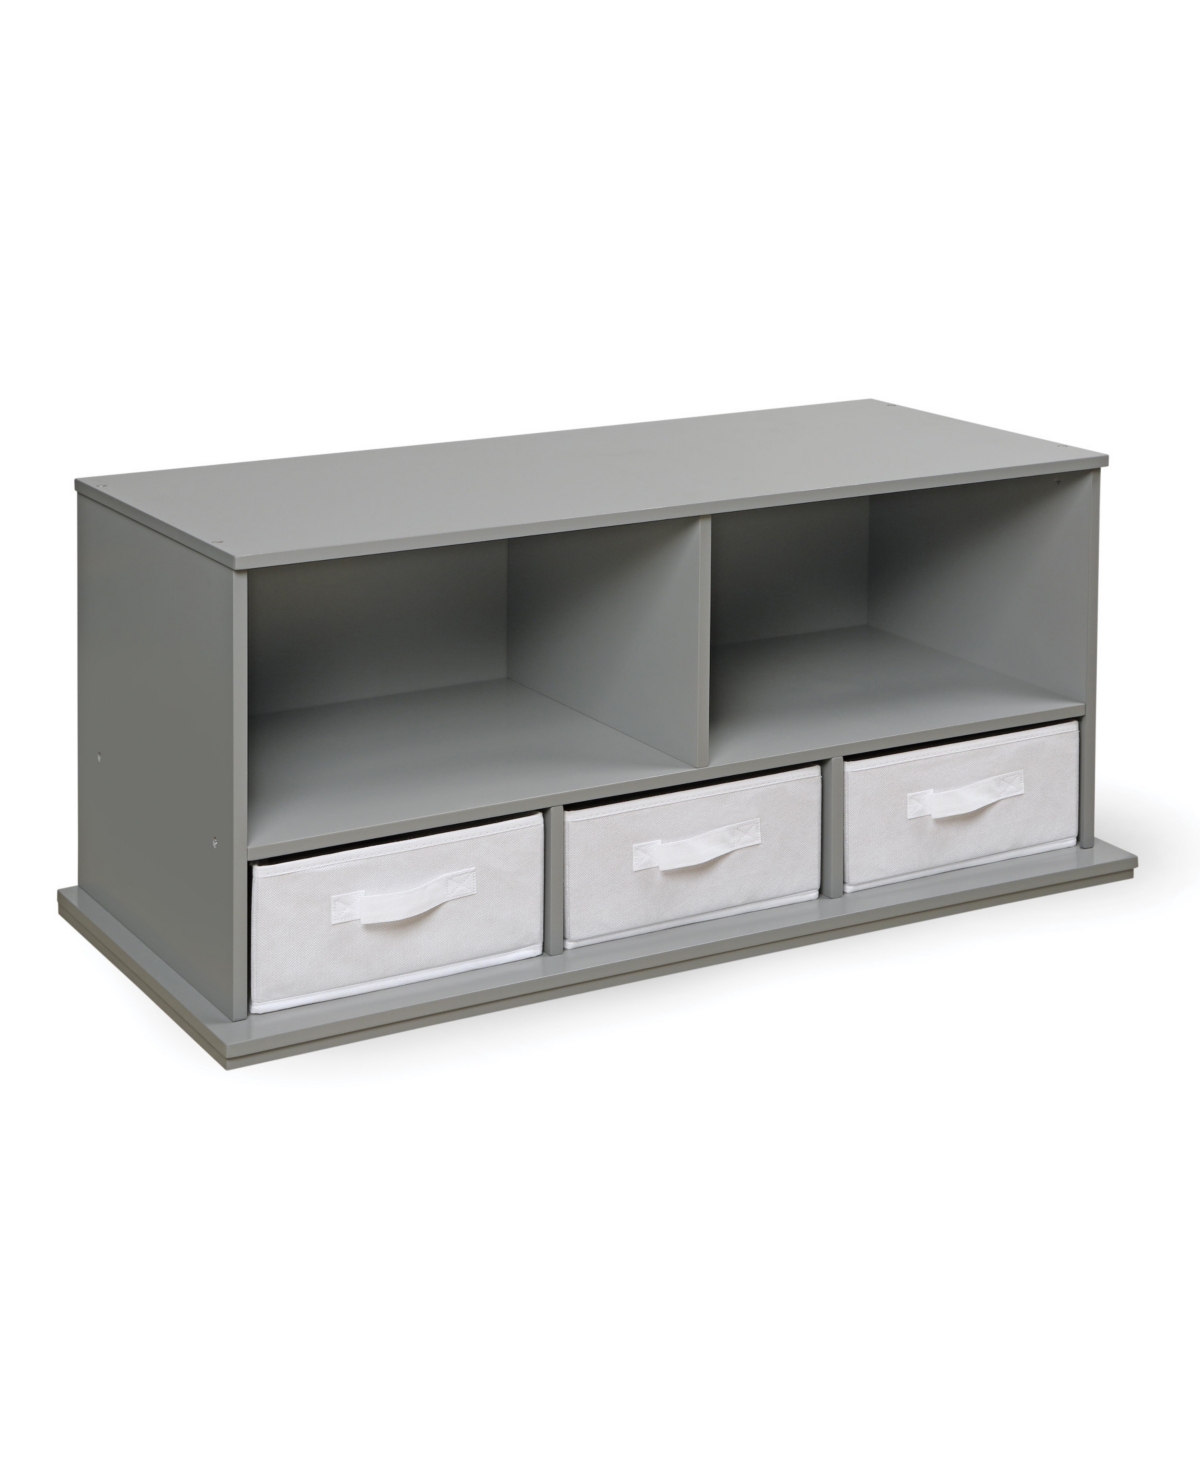 Stackable Shelf Storage Cubby With Three Baskets - Gray